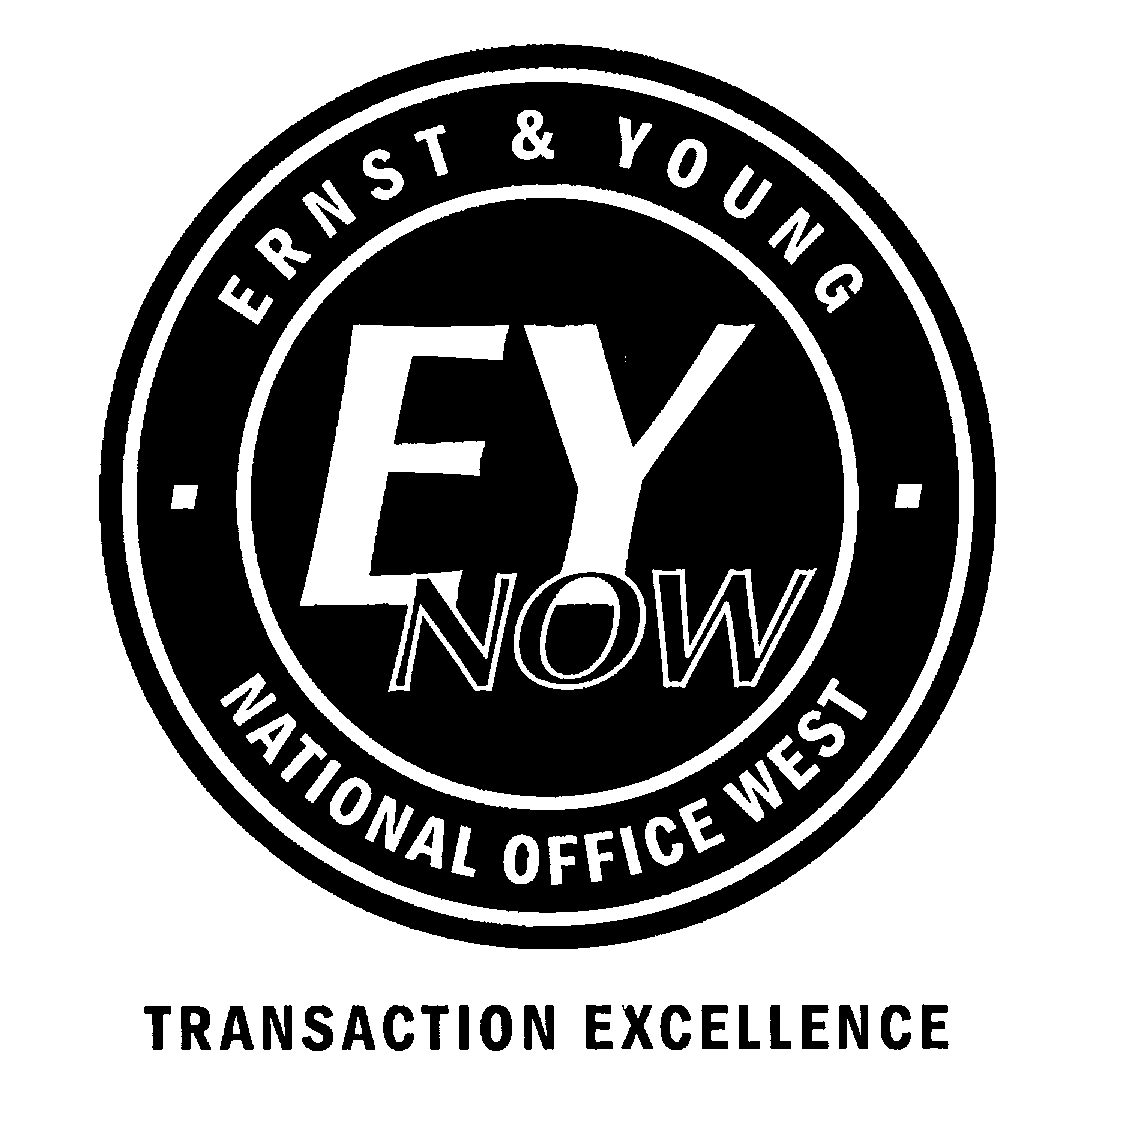 Trademark Logo ERNST & YOUNG EYNOW NATIONAL OFFICE WEST TRANSACTION EXCELLENCE